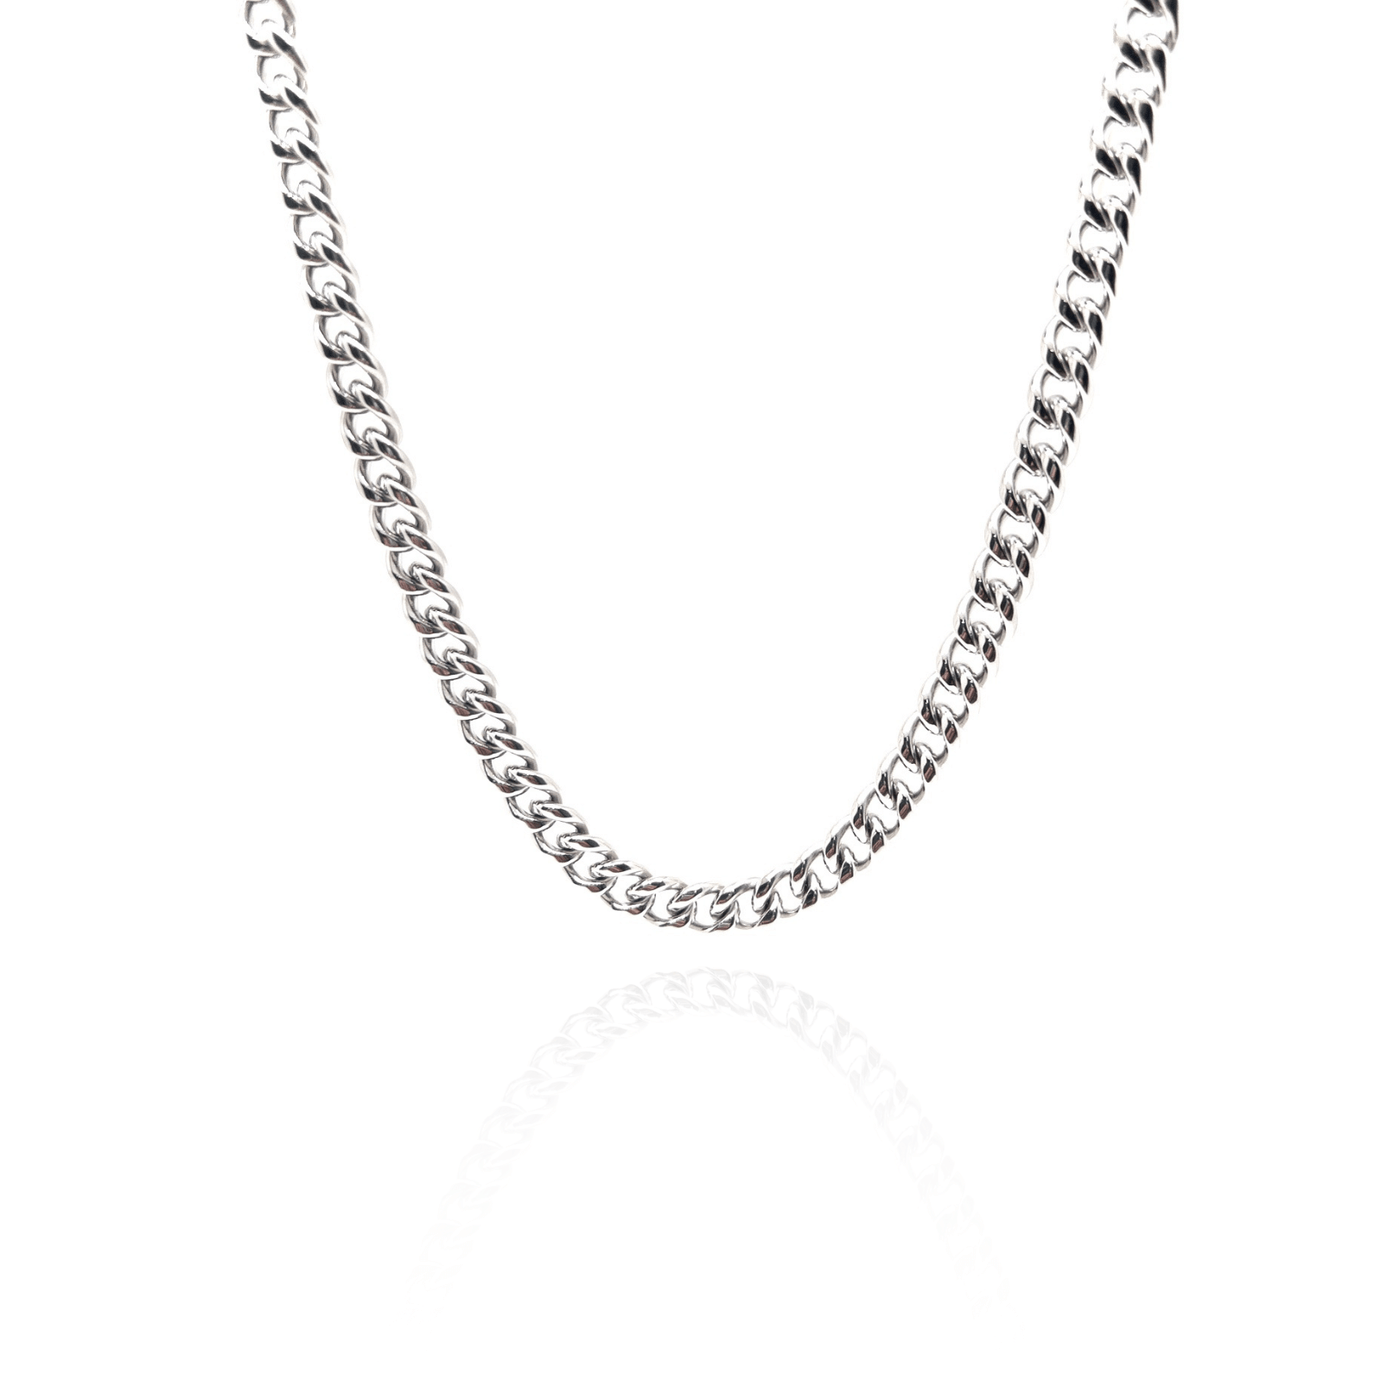 The Silver Plated Cuban Chain